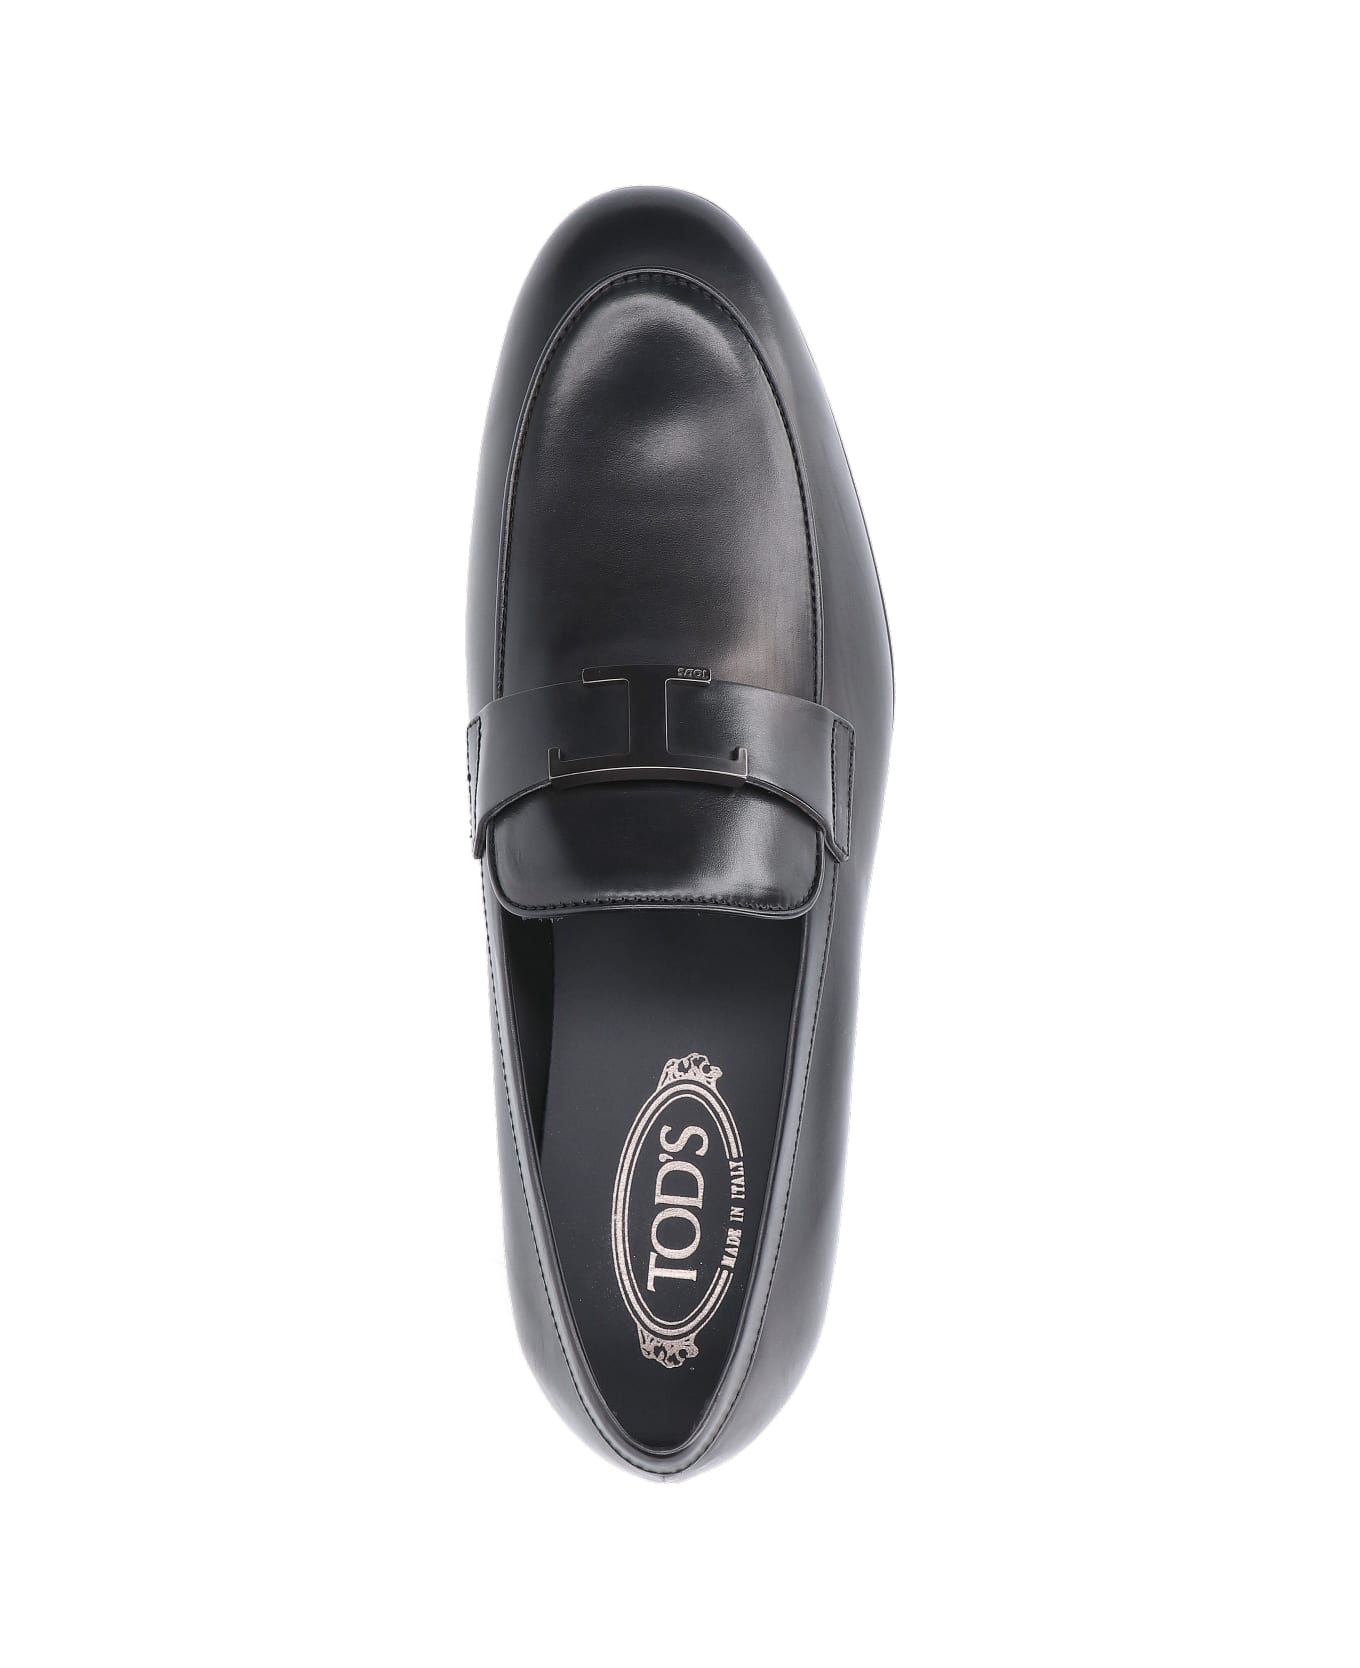 Tod's 't- Senza Tempo' Leather Moccasin - Black ローファー＆デッキシューズ